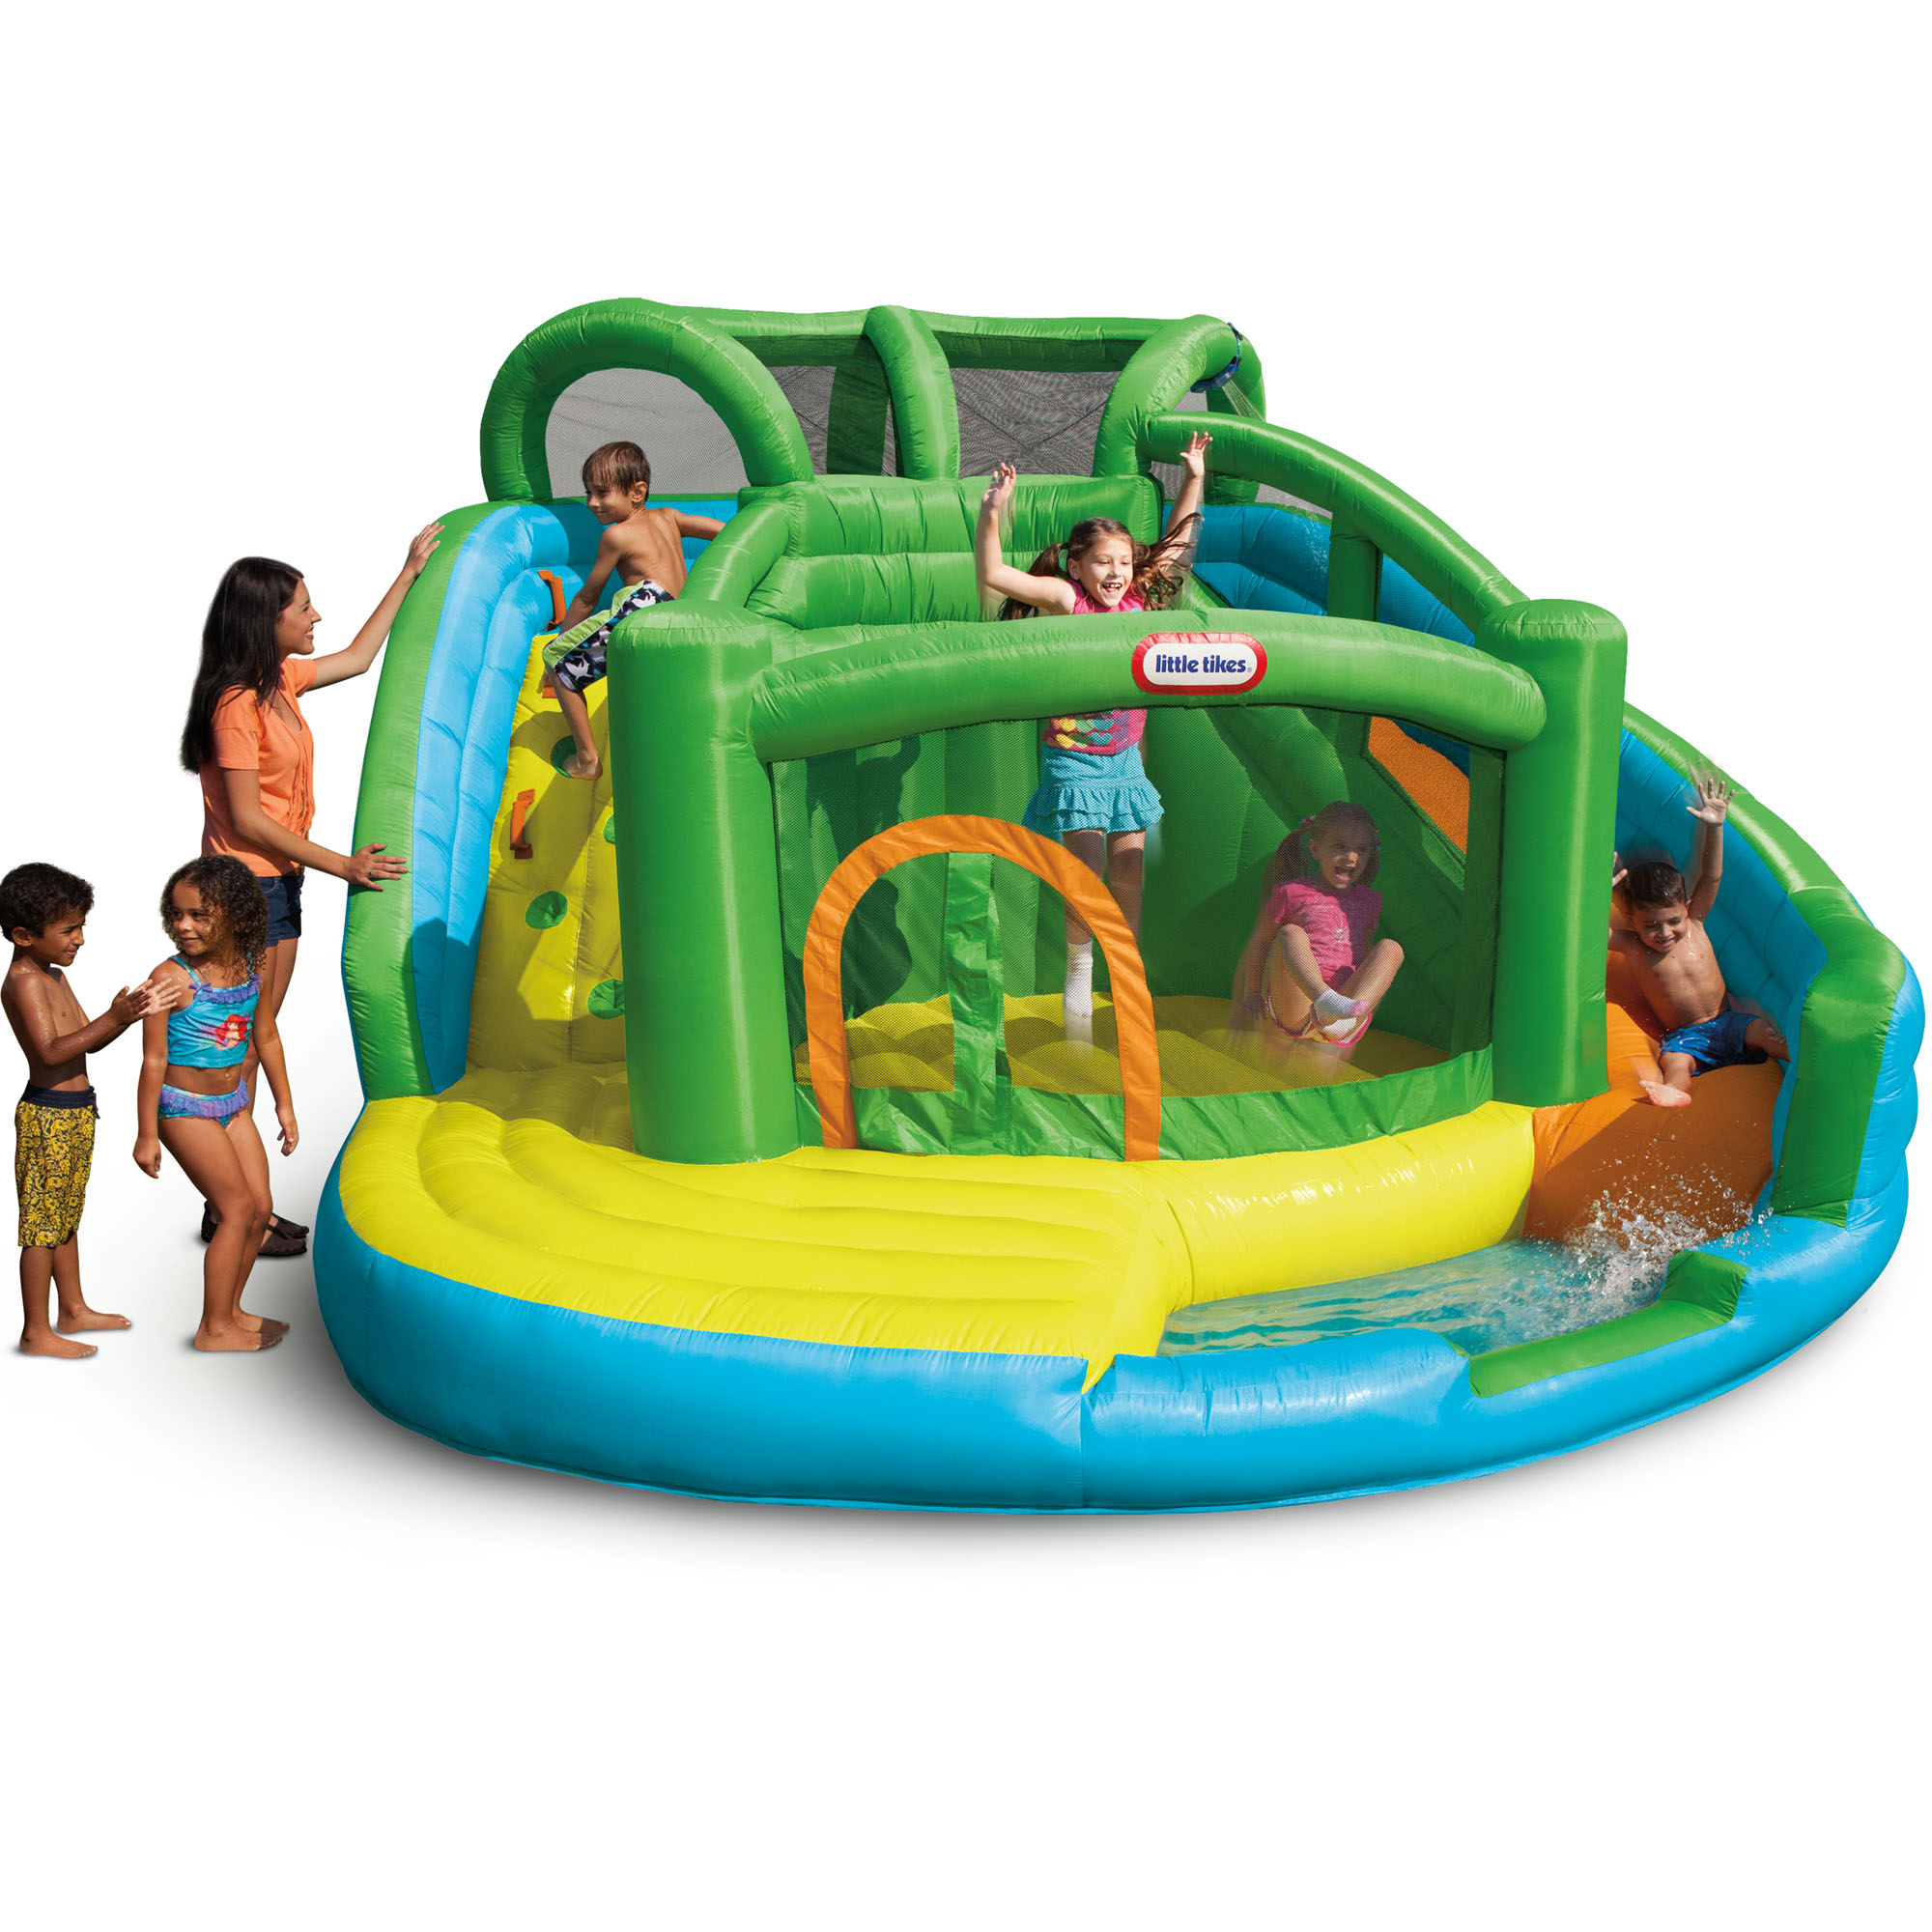 Little Tikes 2-in-1 Wet n Dry Inflatable Bouncer